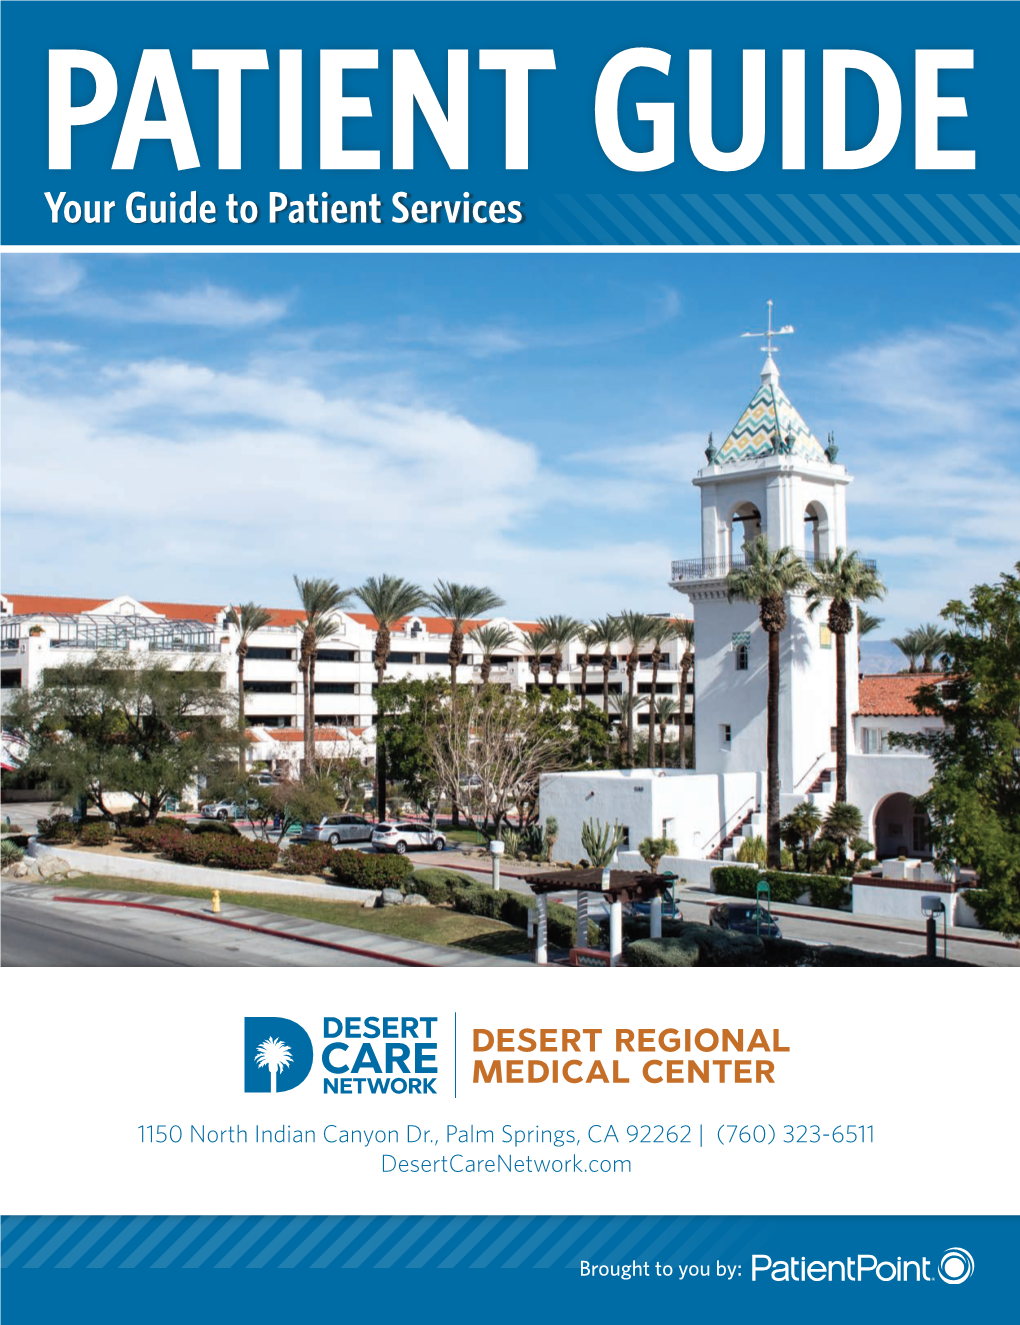 PATIENT GUIDE Your Guide to Patient Services